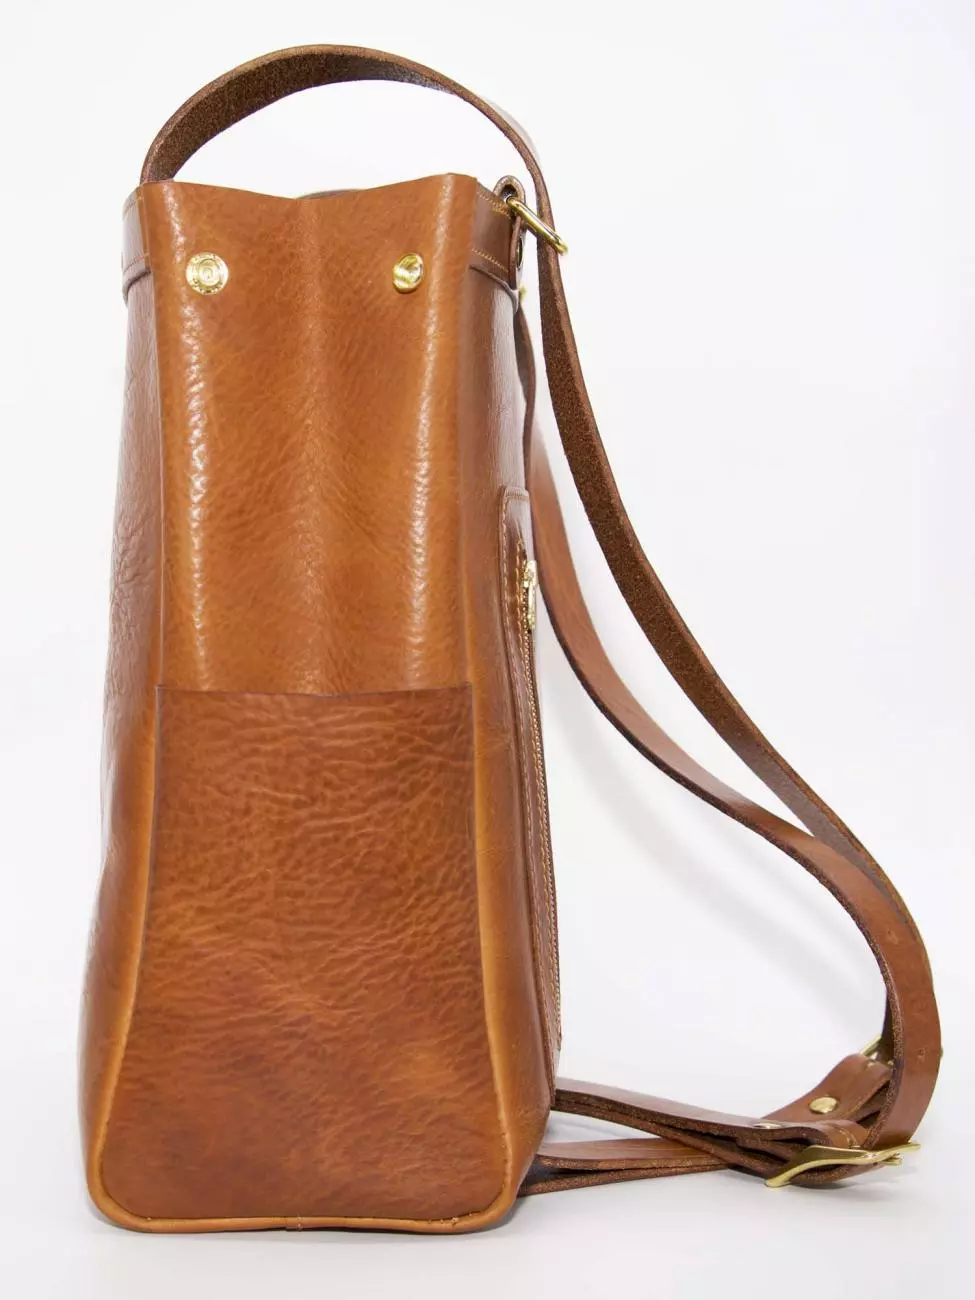 7 - Women leather backpack